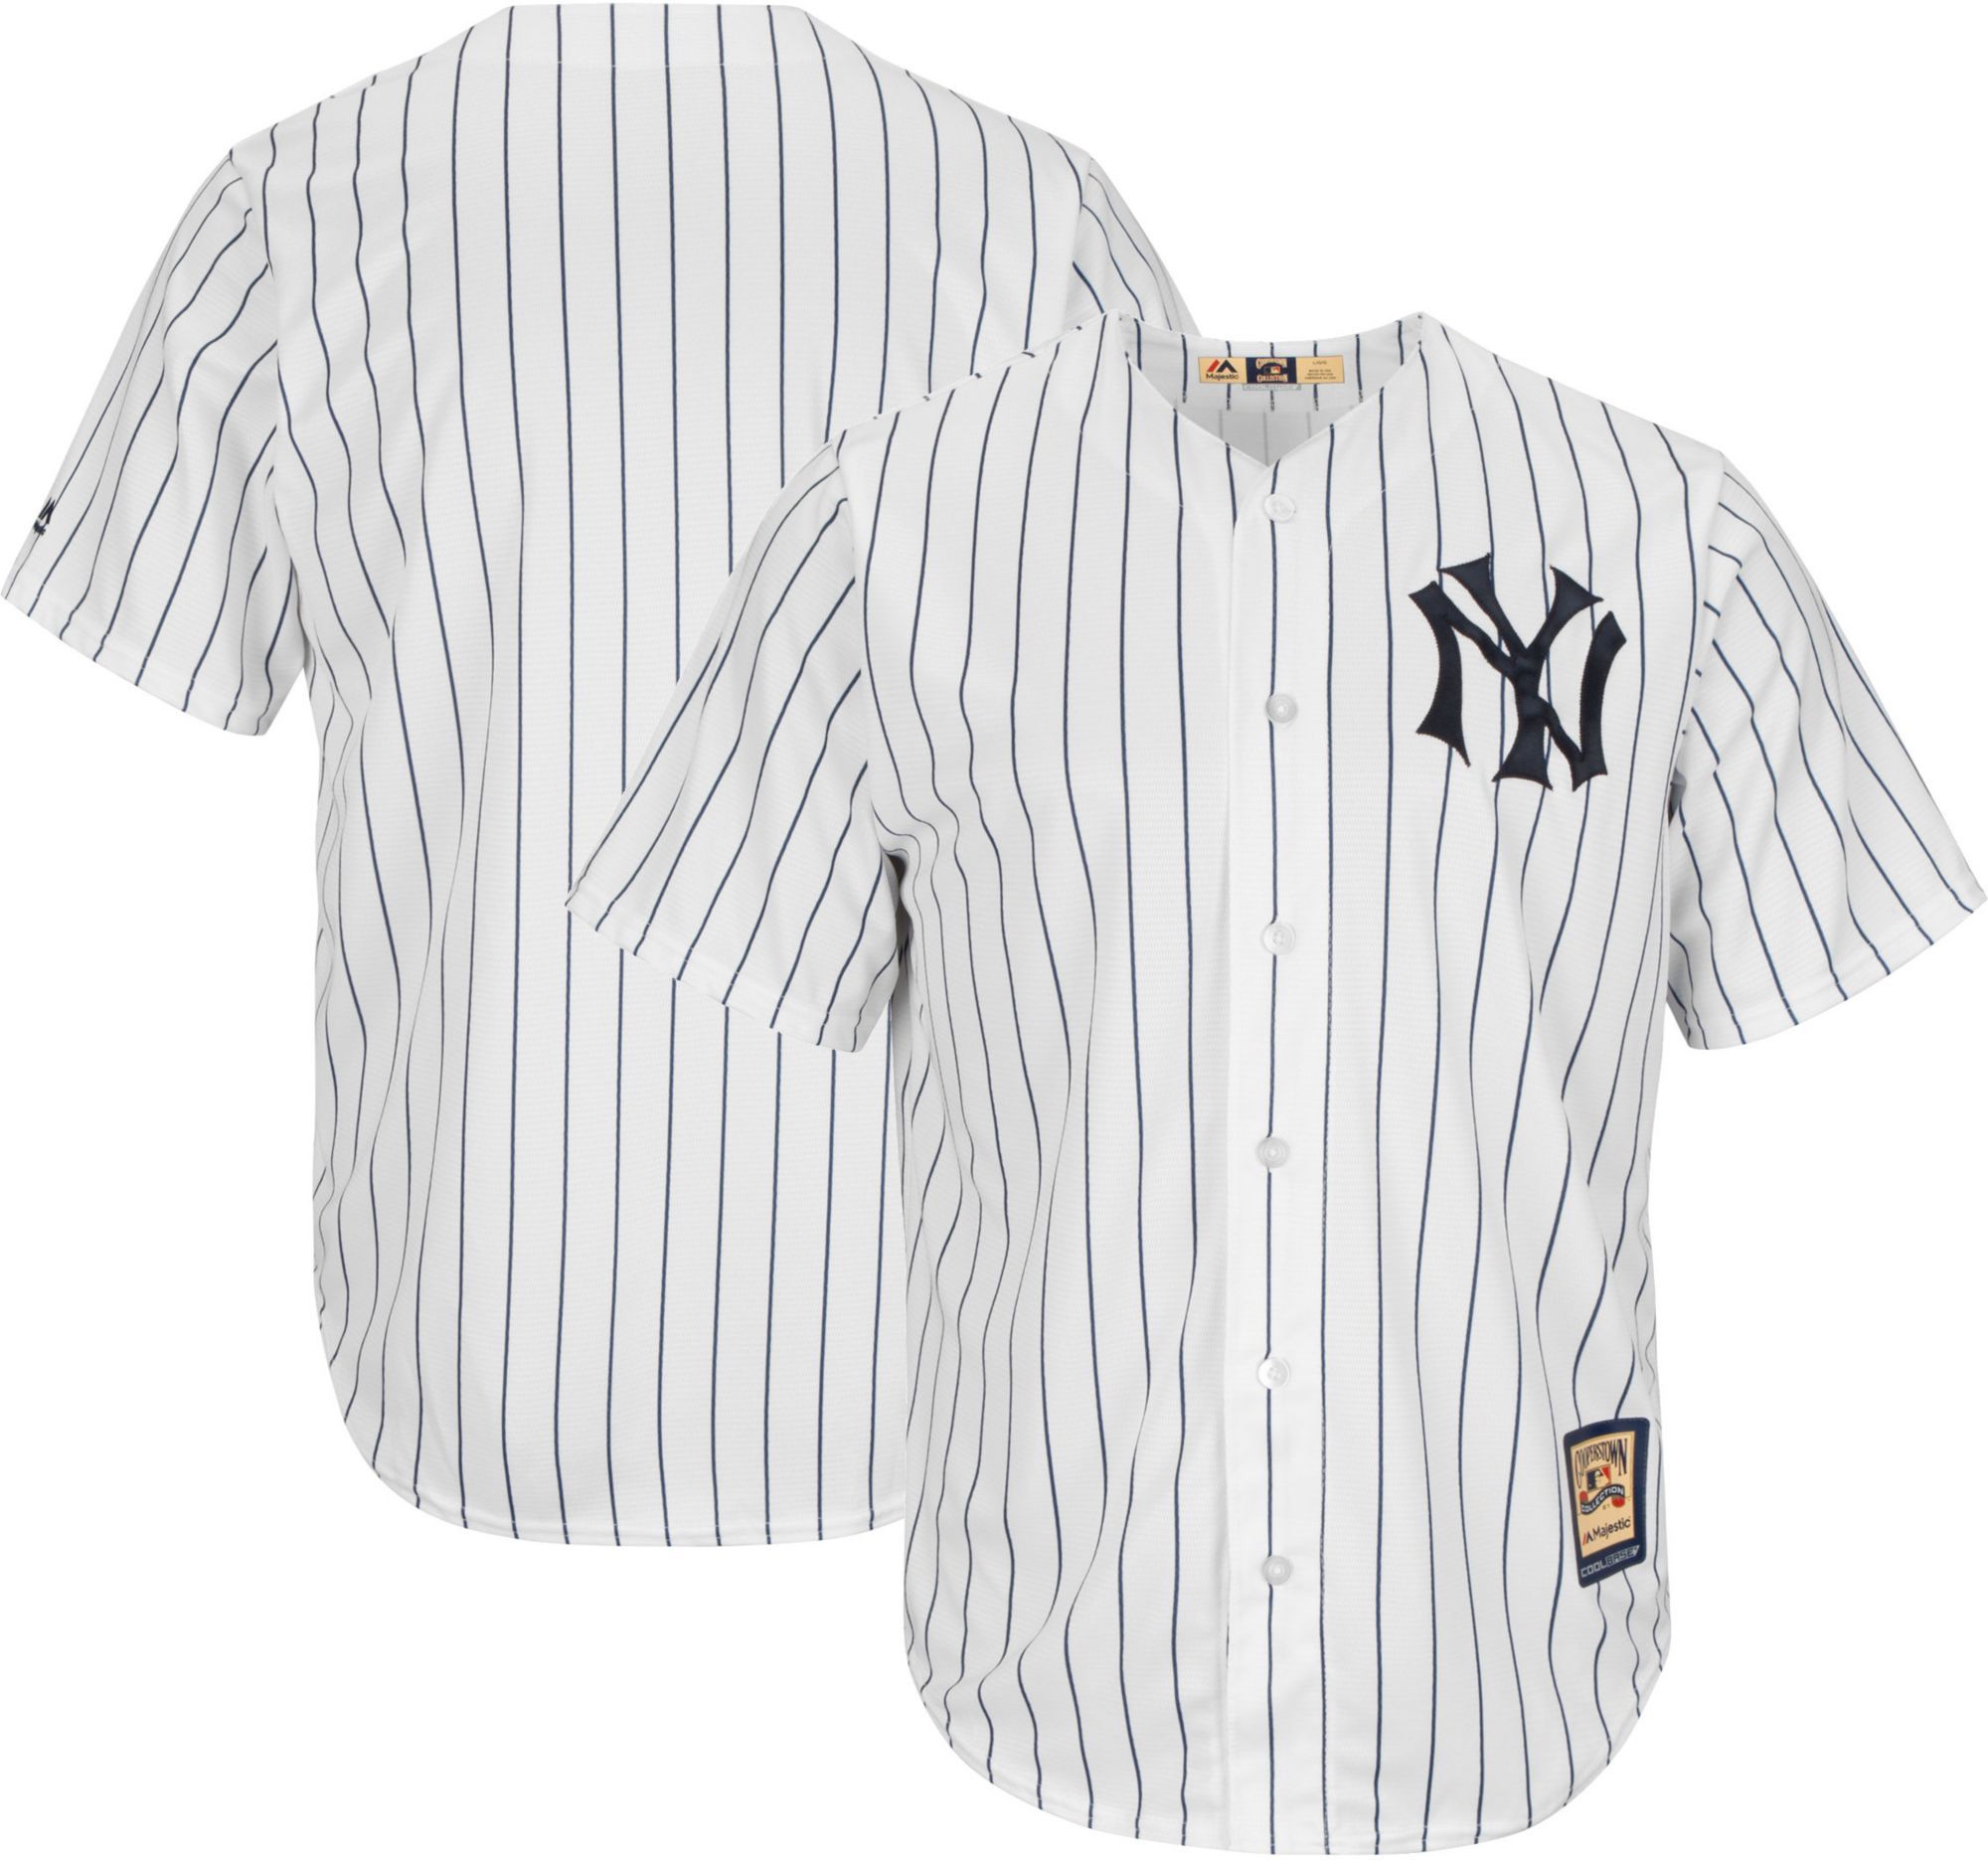 Men's Replica New York Yankees Cool Base White Cooperstown Jersey